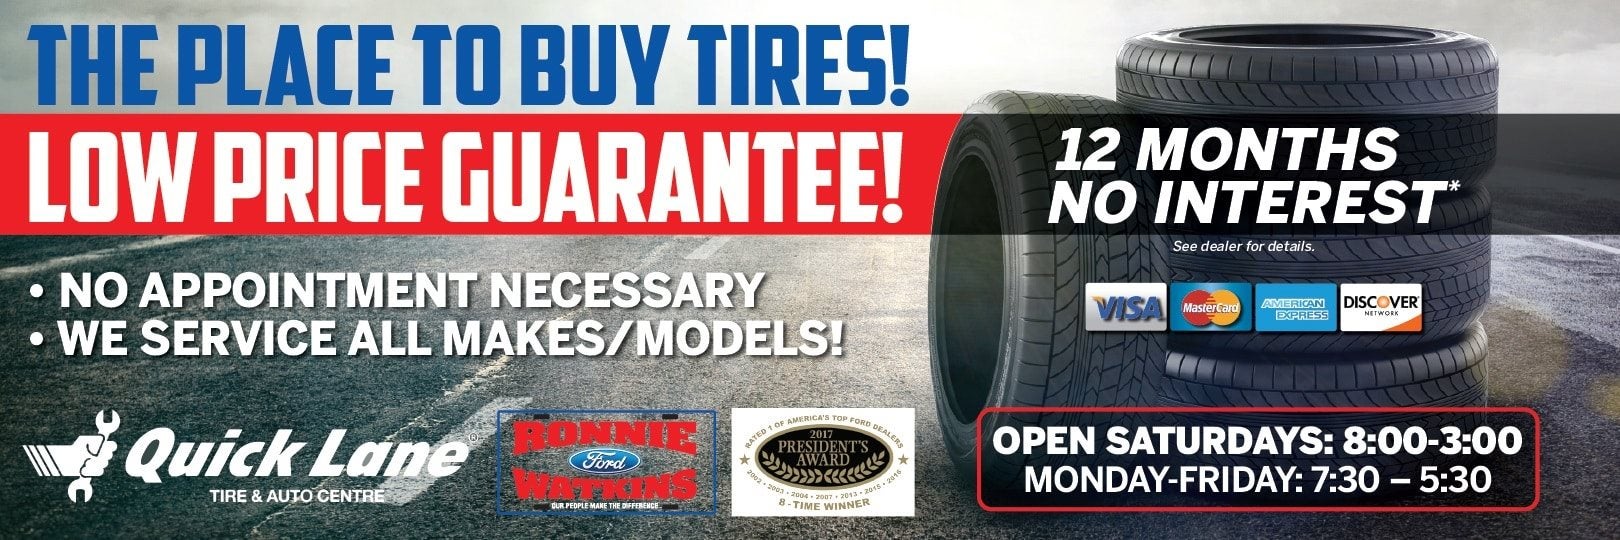 The Place to Buy Tires, Lowest Price Guarantee!